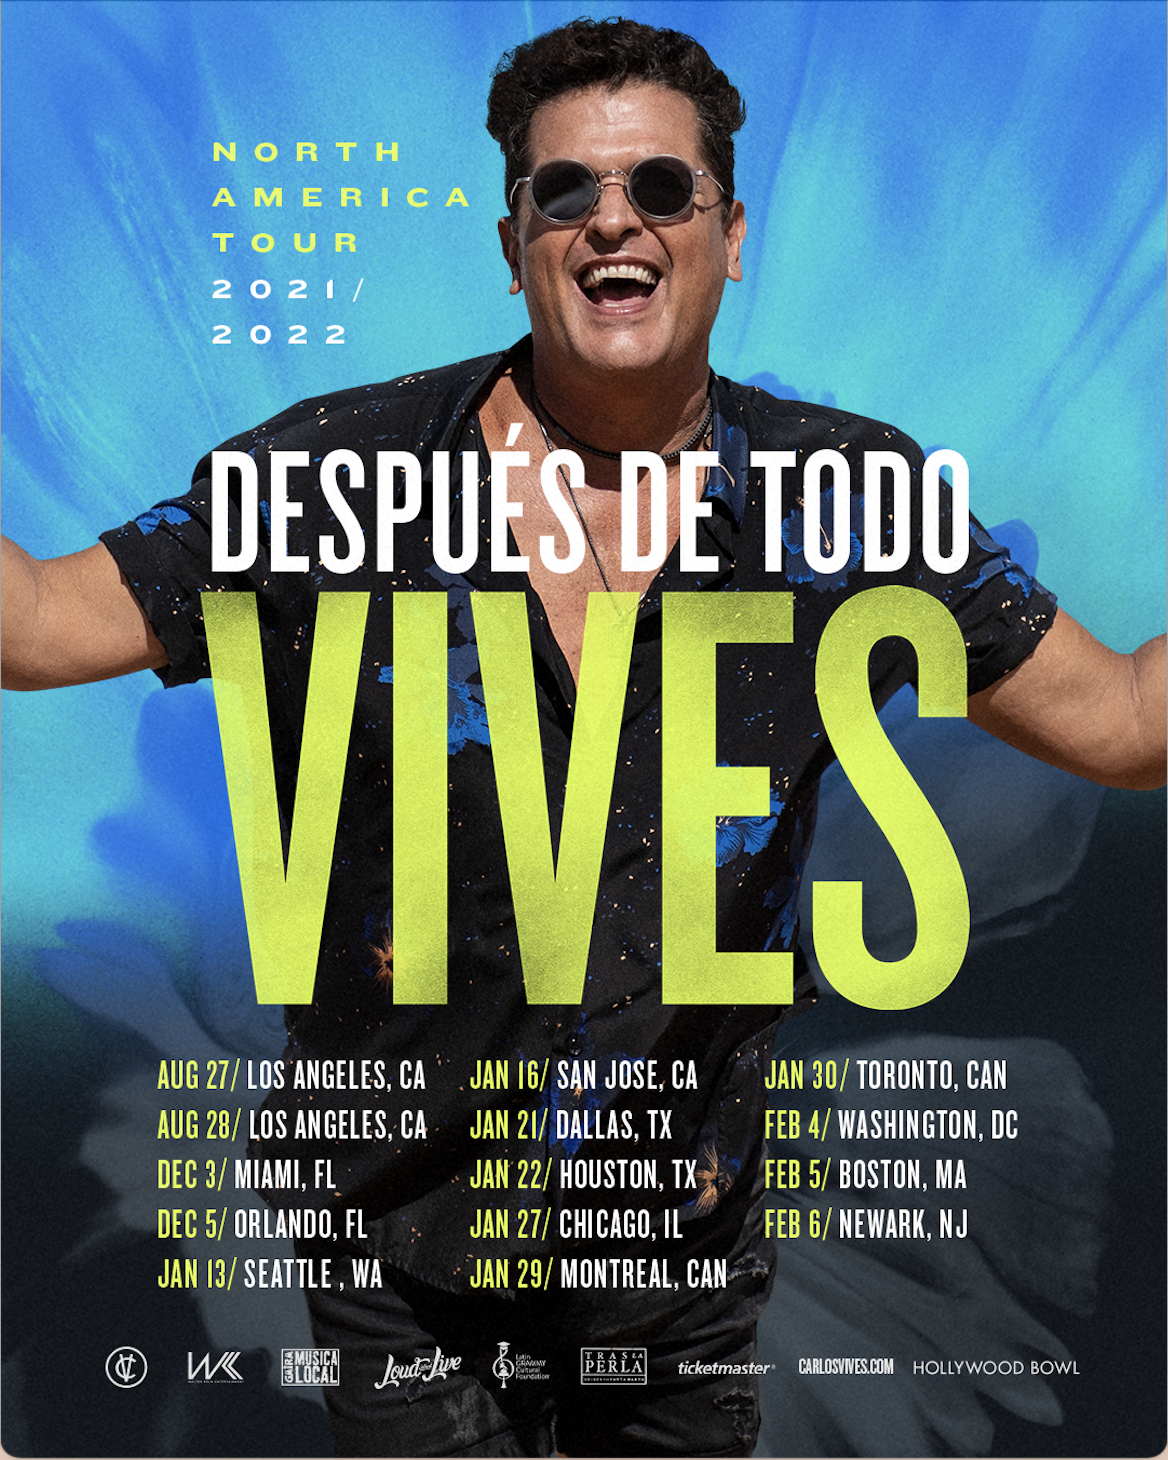 CARLOS VIVES GRAMMY® AND LATIN GRAMMY® AWARD WINNING MULTIPLATINUM MUSICIAN AND SONGWRITER ANNOUNCES HIGHLY-ANTICIPATED RETURN TO THE STAGE WITH HIS “DESPUÉS DE TODO… VIVES” TOUR